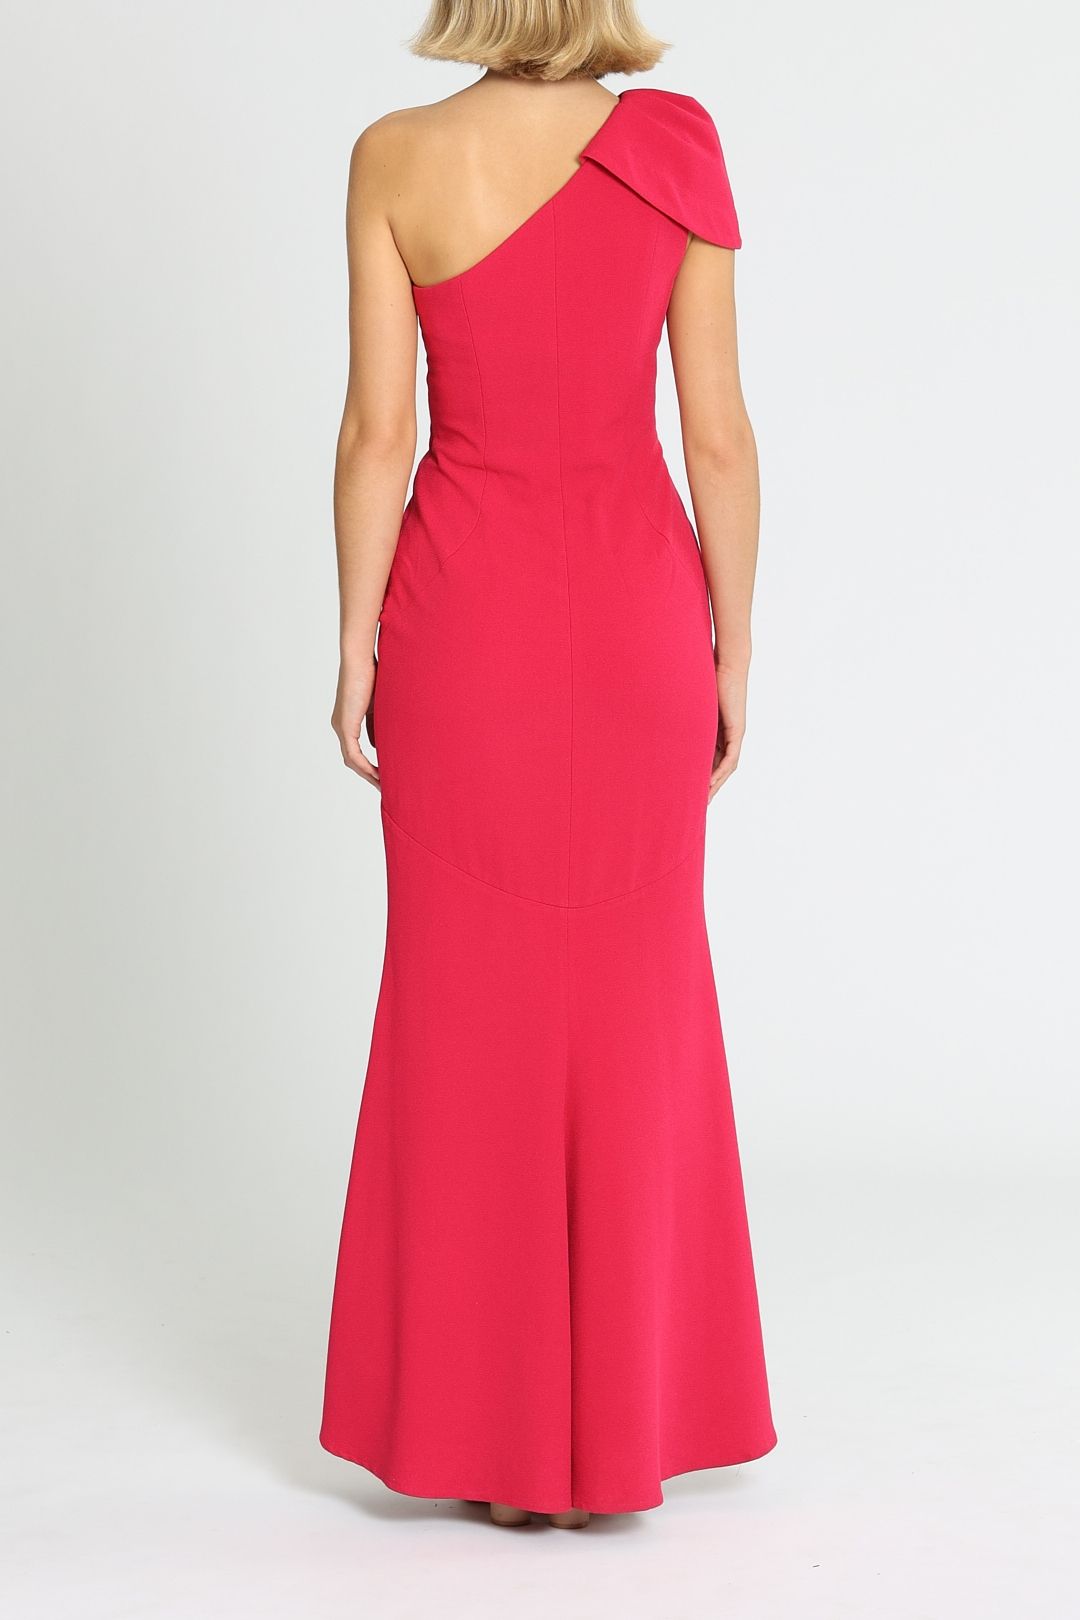 Poppy Gown in Red by Rebecca Vallance for Rent